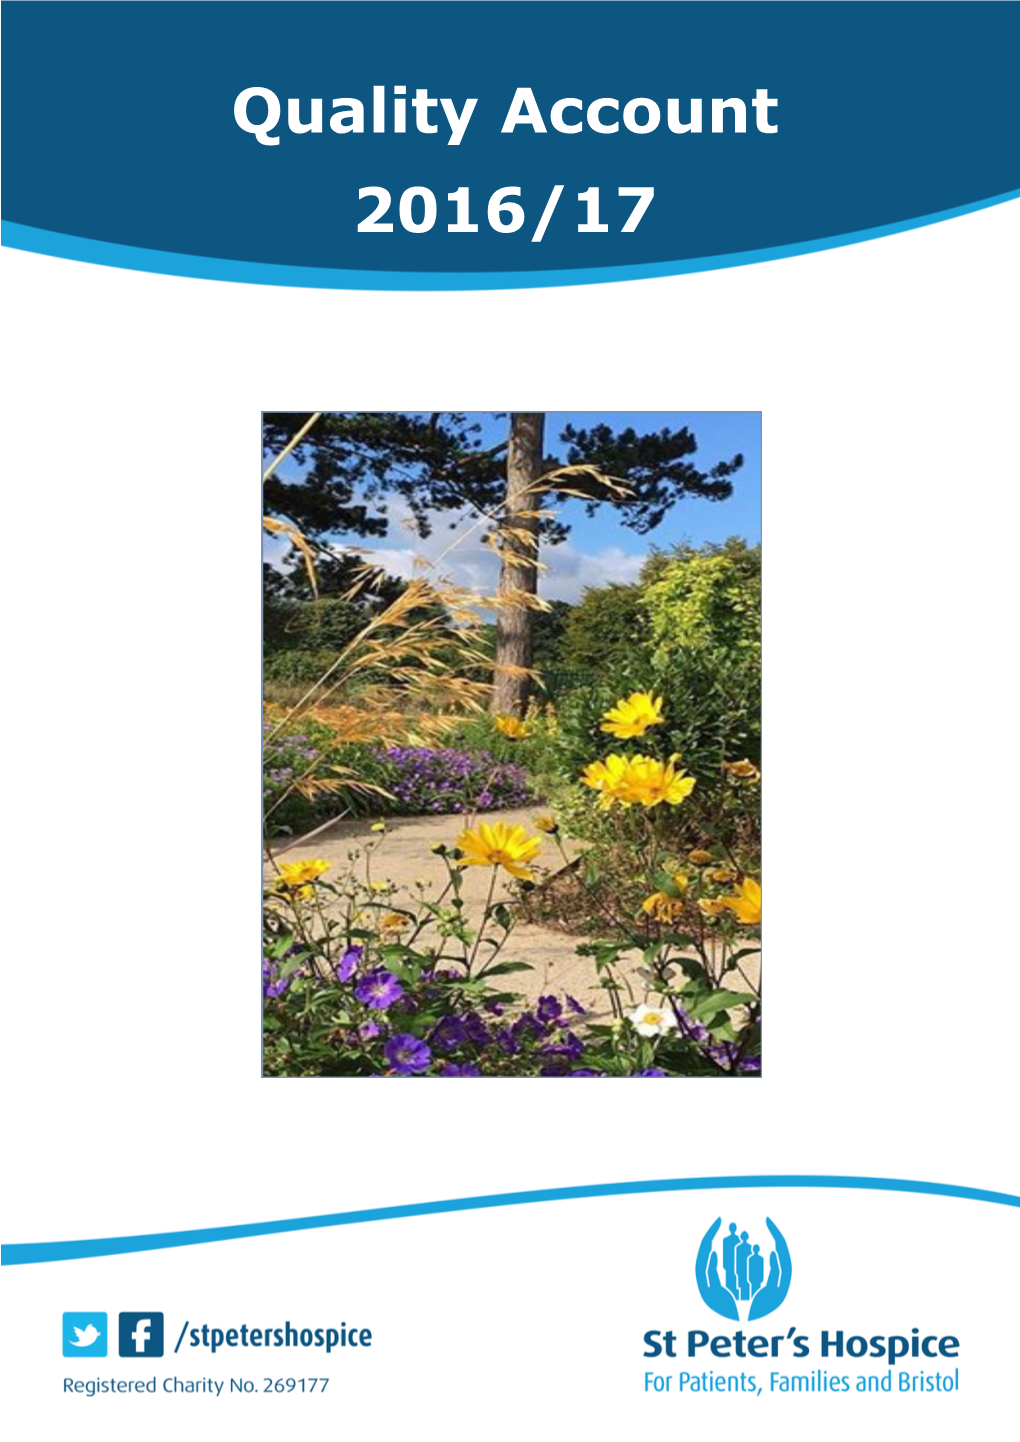 St Peter's Hospice Quality Account 2016/17